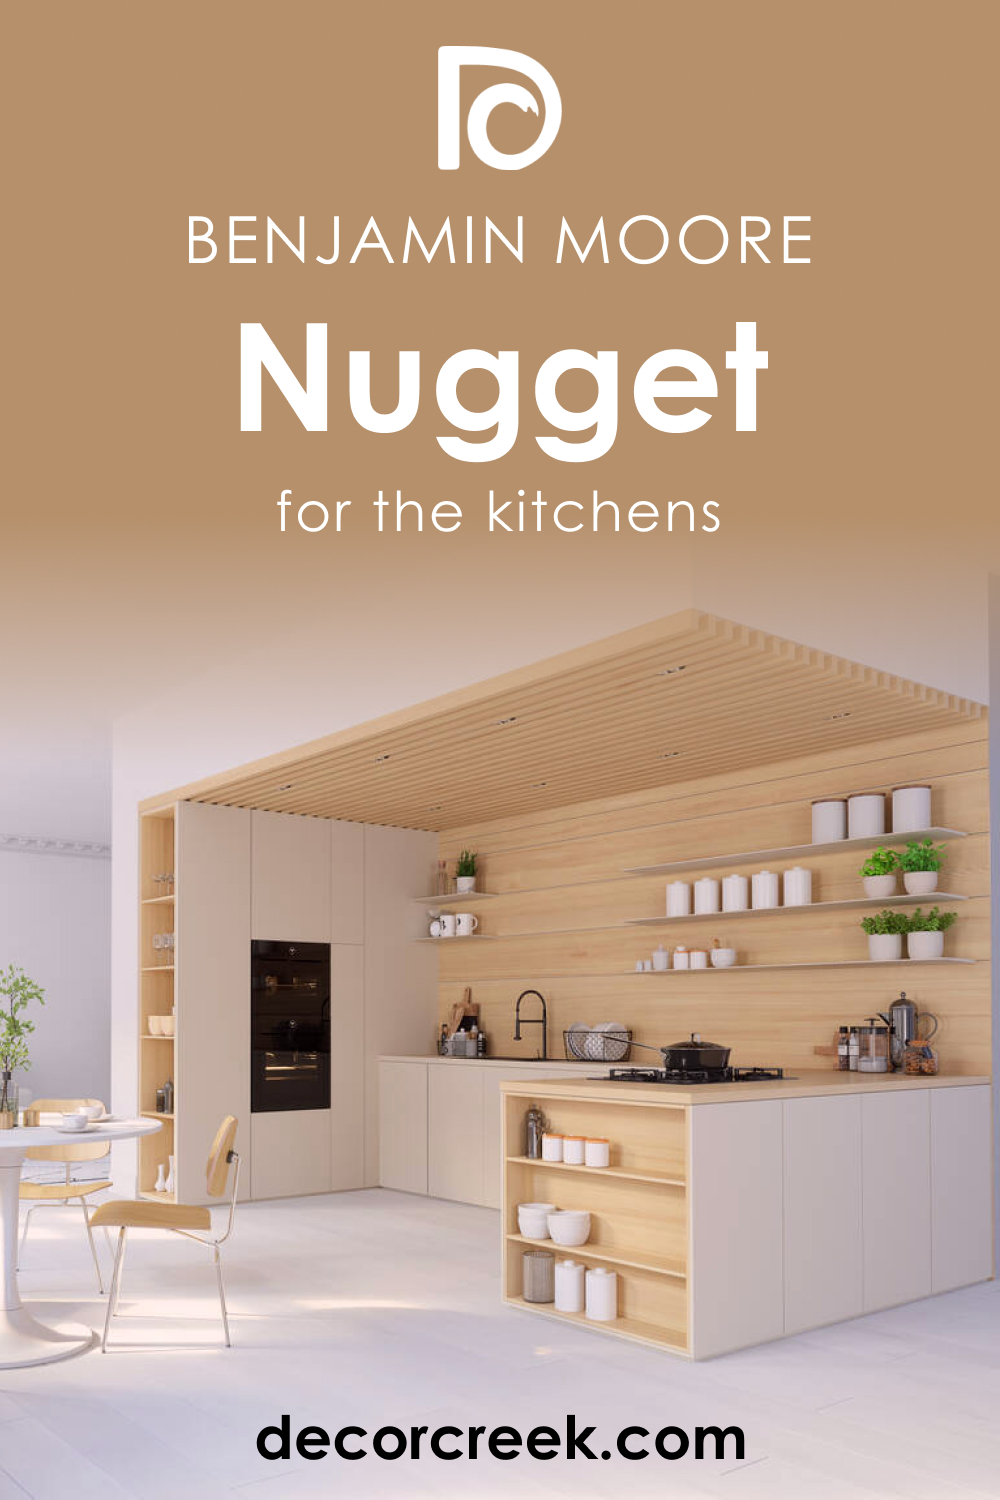 How to Use Nugget AC-9 in the Kitchen?